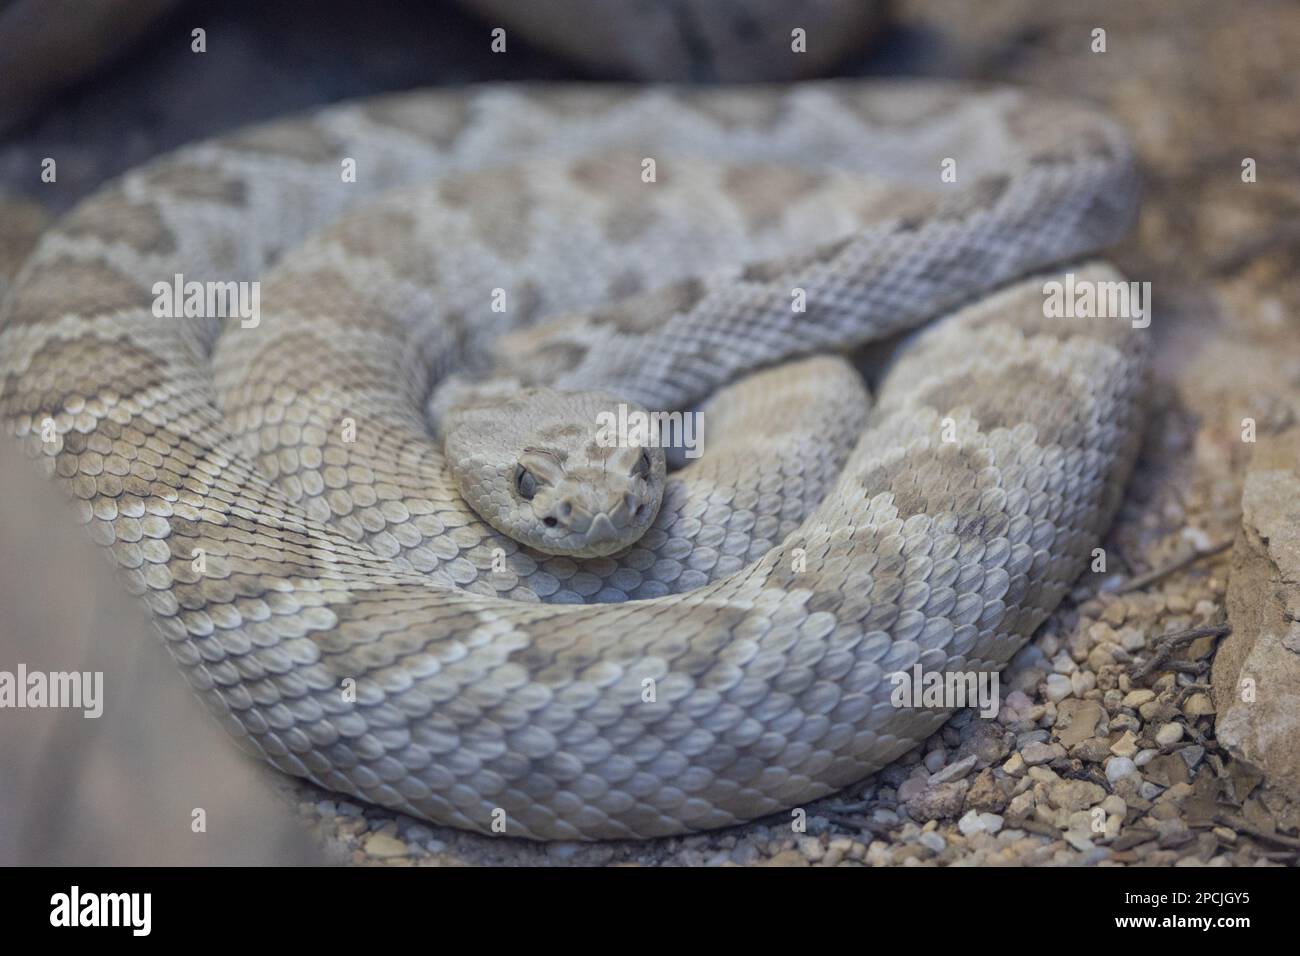 Catalina Island rattlesnake curled up and ready to strike Stock Photo